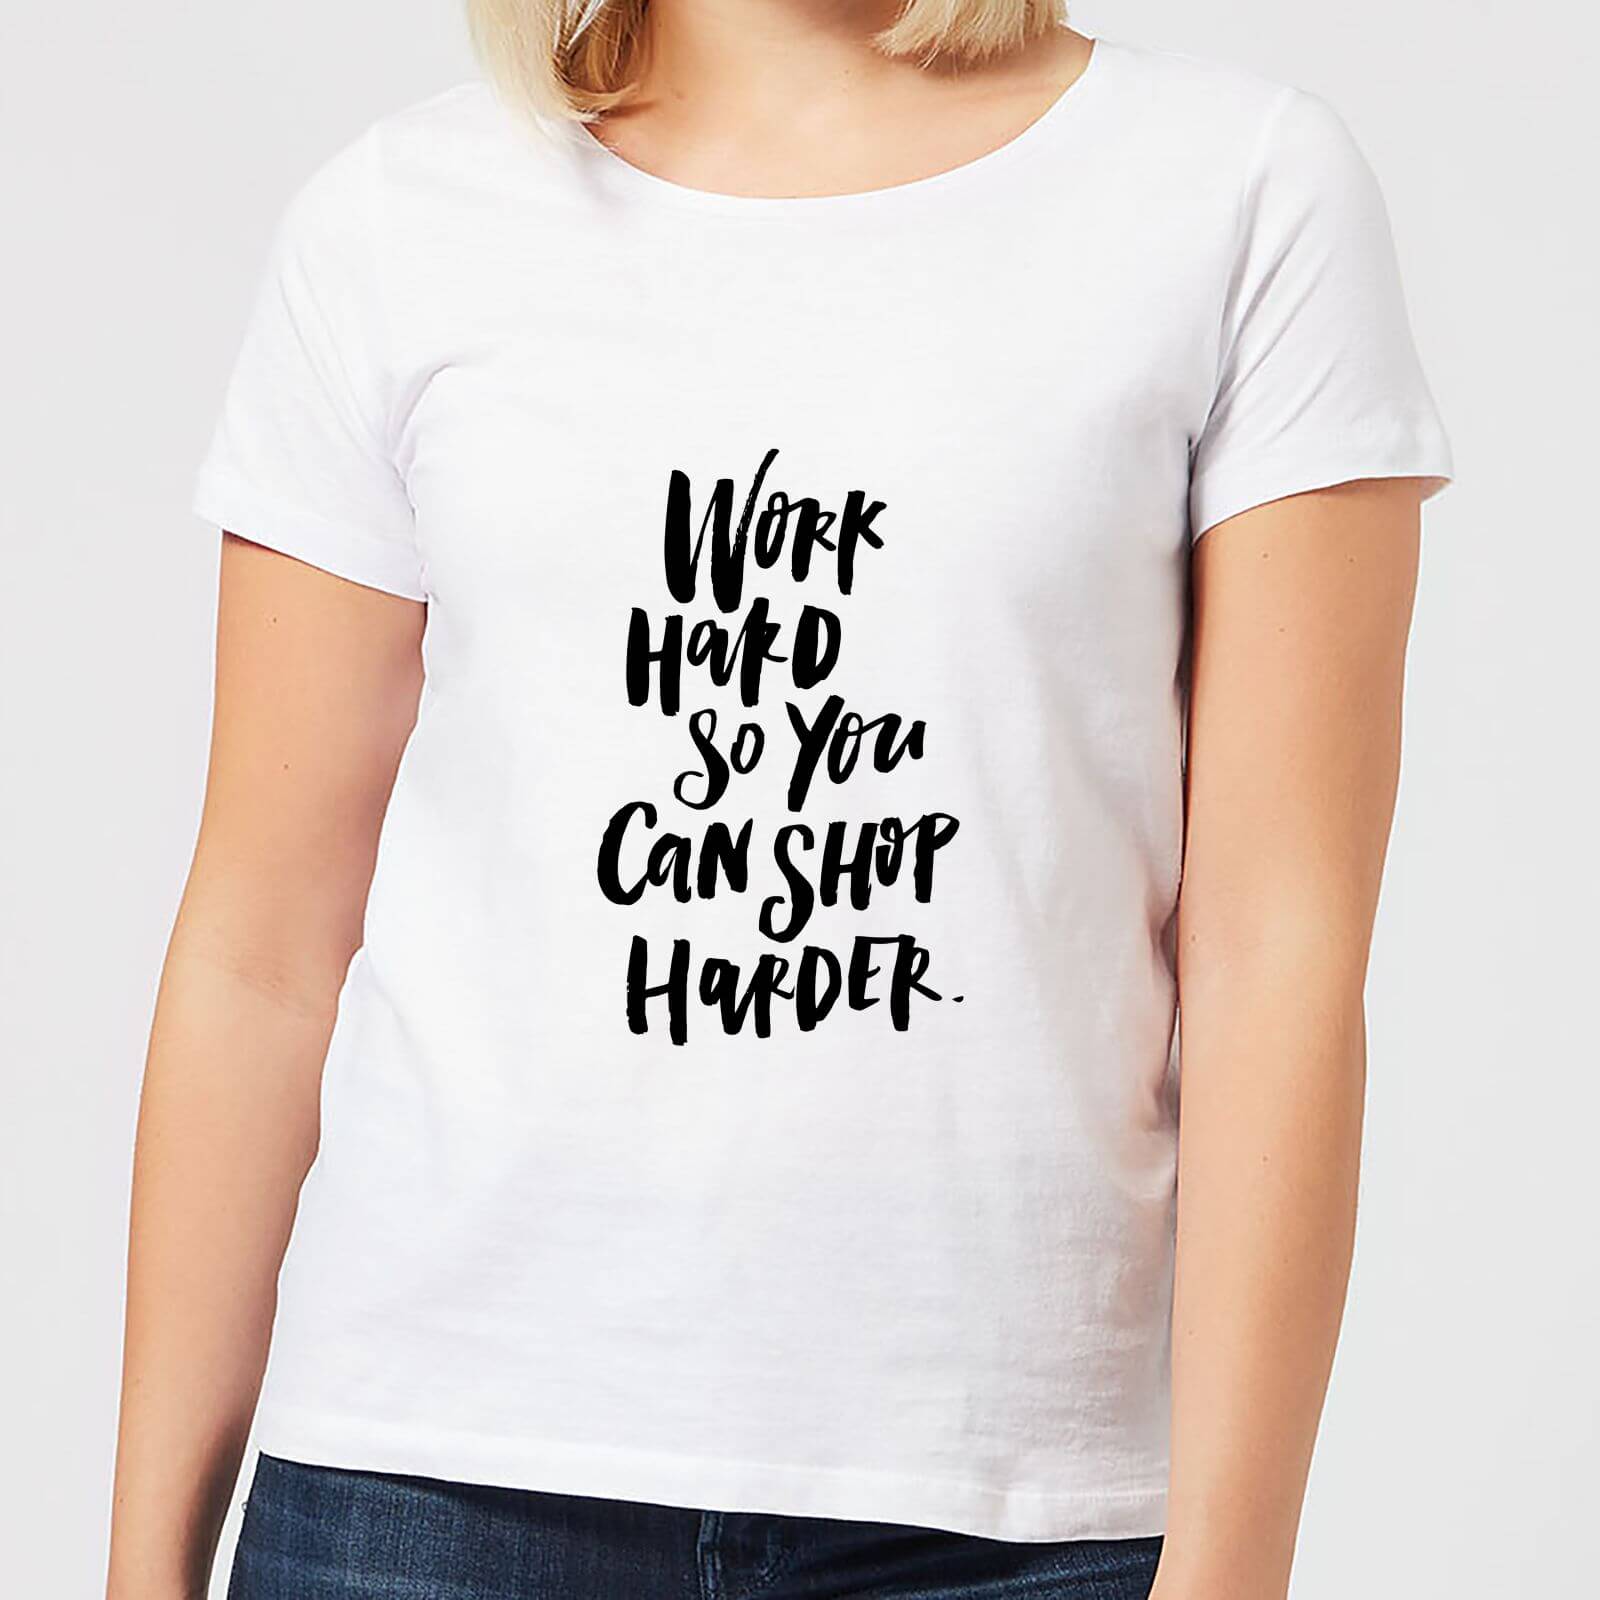 Work Harder So You Can Shop Harder Women's T-Shirt - White - S - White